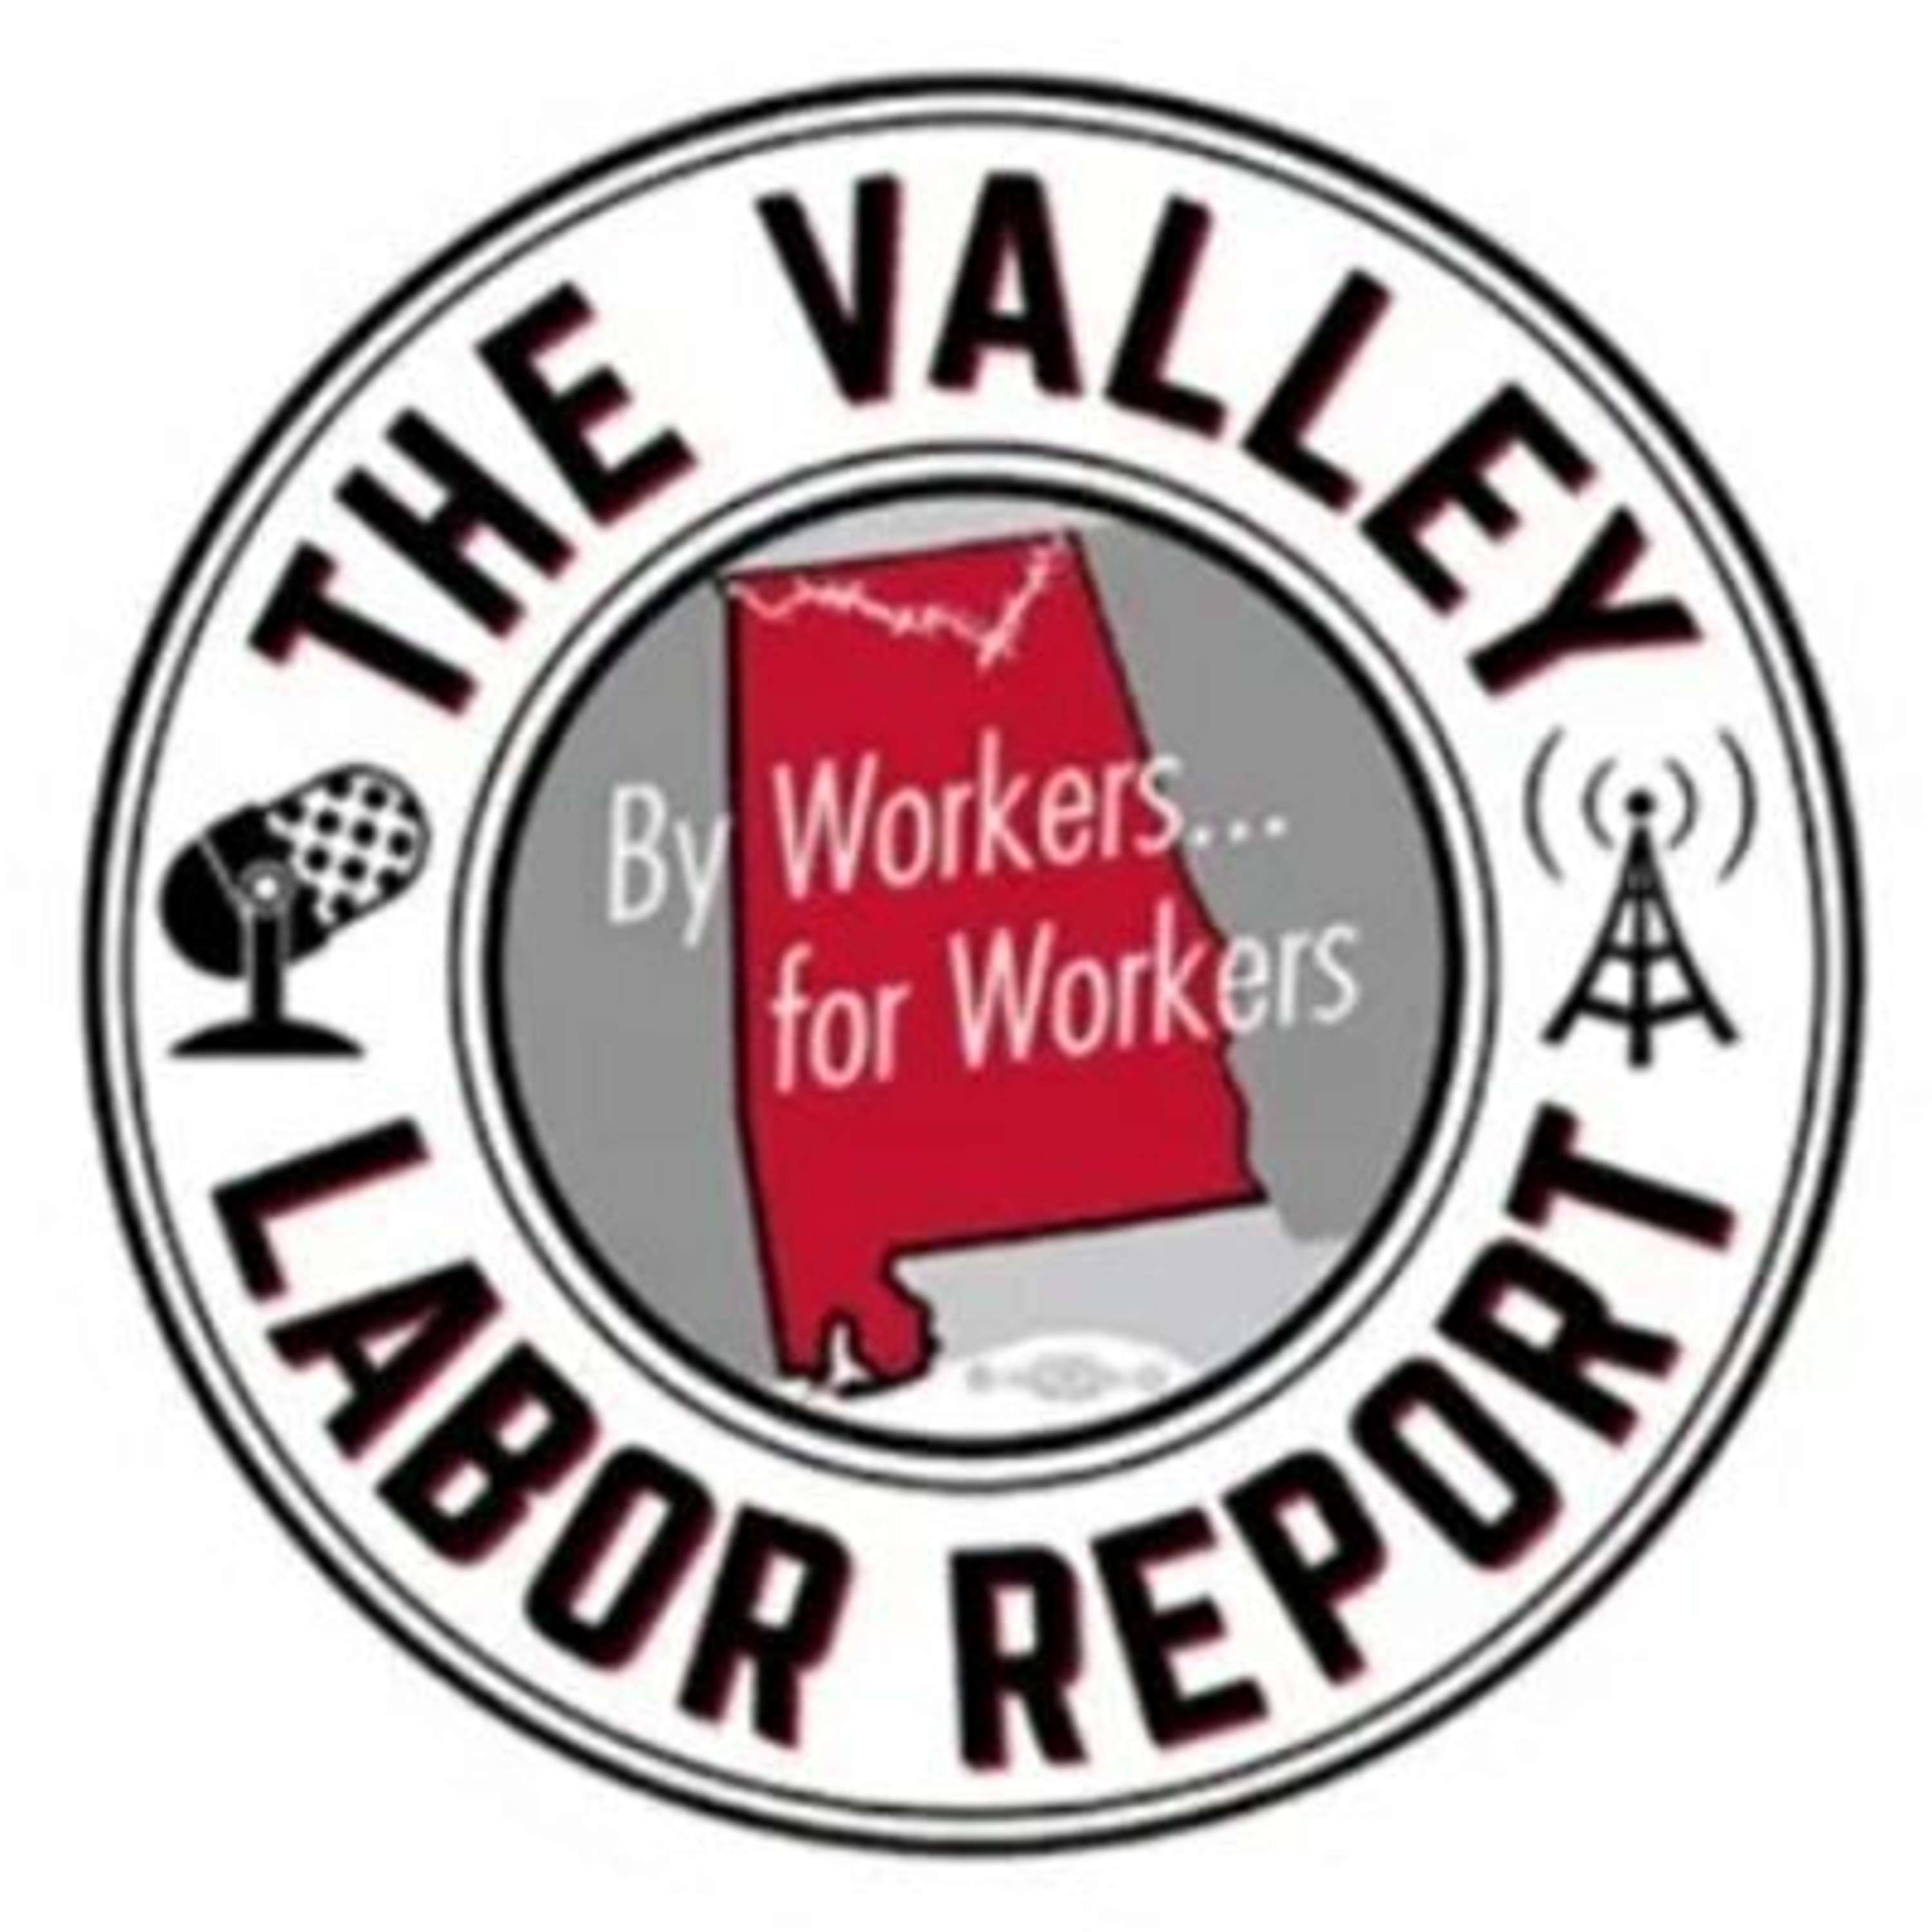 AFLCIO Report: CEO to Worker Pay at Amazon is 6,474:1 + Child Labor in Alabama - TVLR 7/23/22